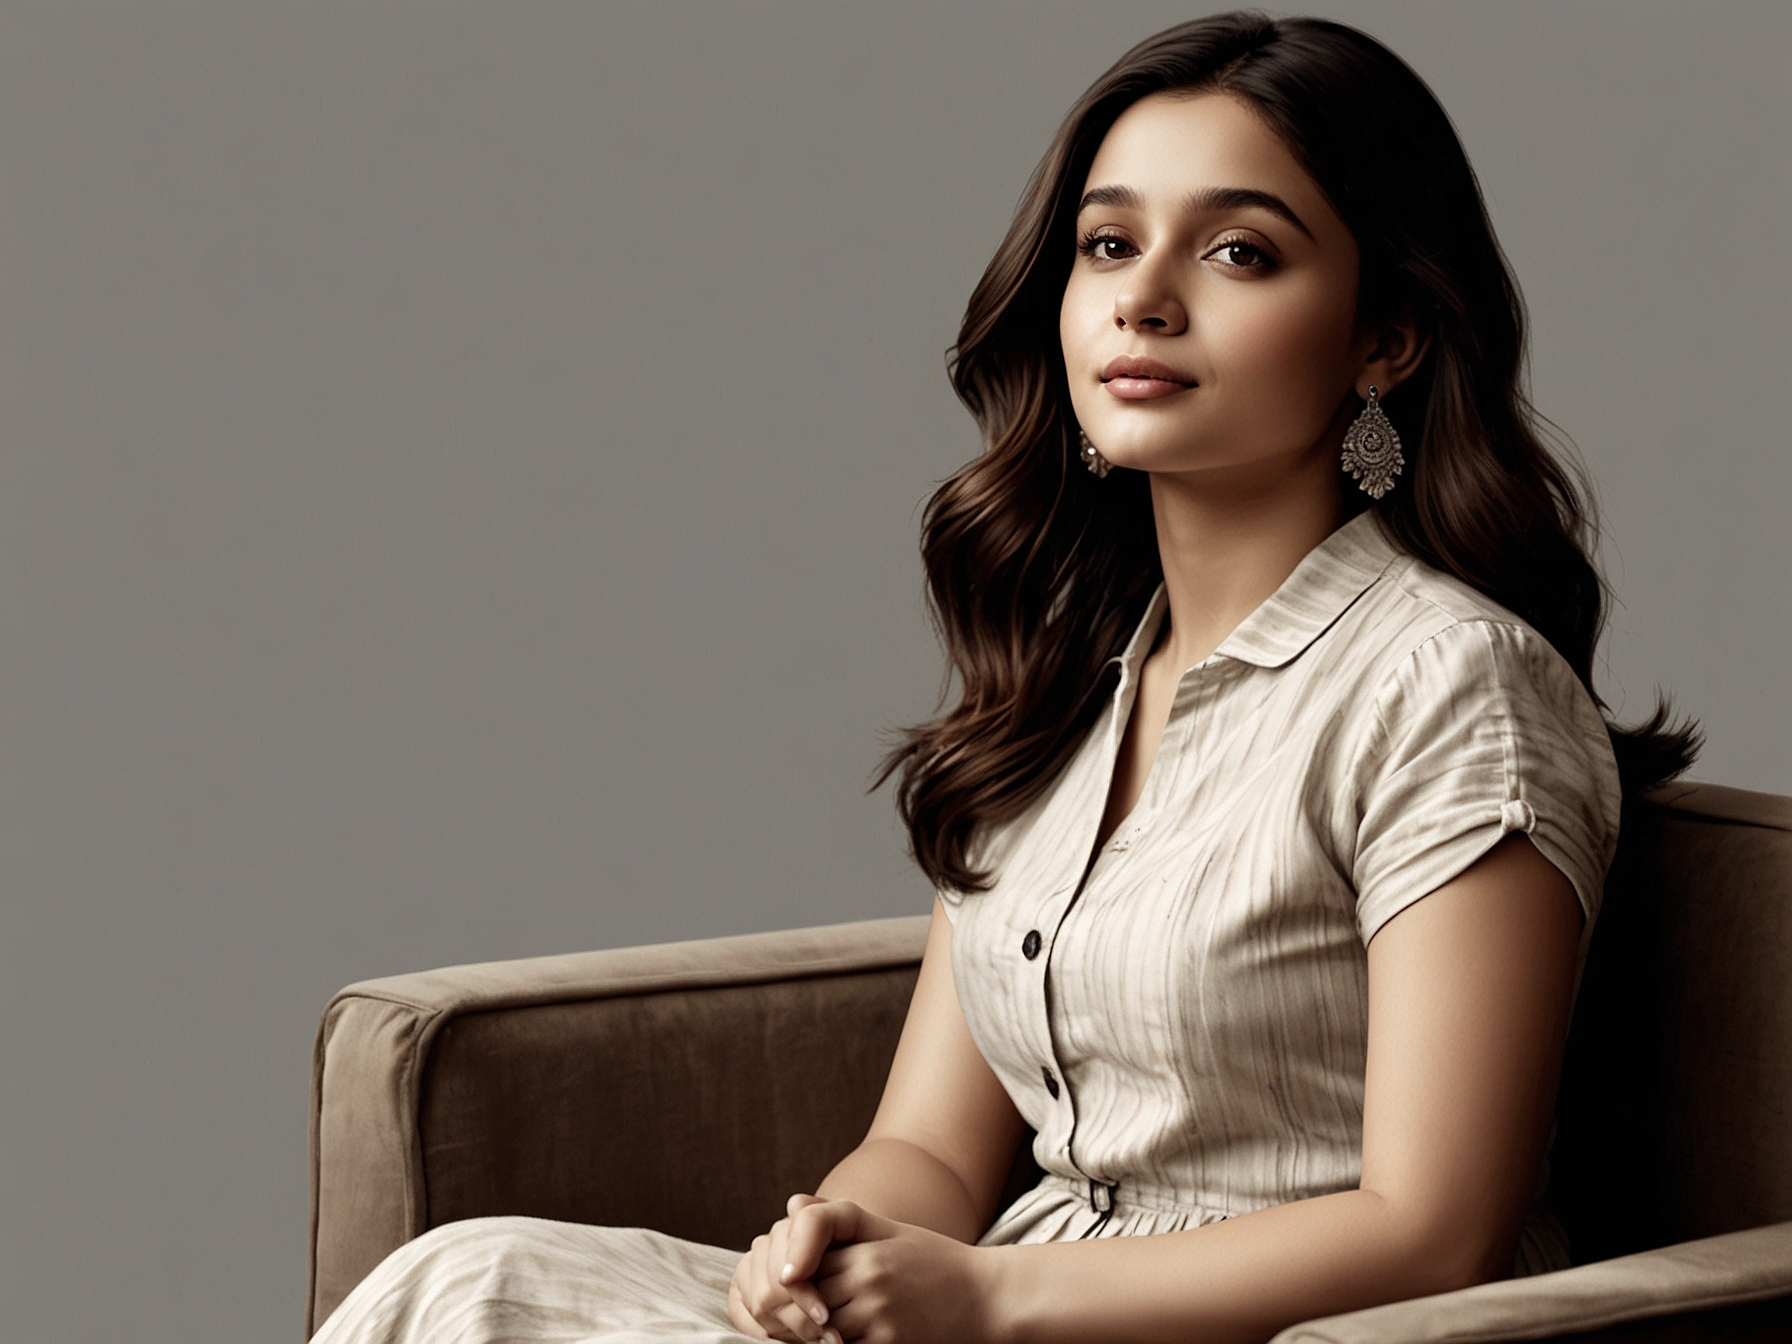 Alia Bhatt during an exclusive interview, candidly discussing the transformative impact of motherhood on her life and career, highlighting her enhanced empathy and protective instincts.